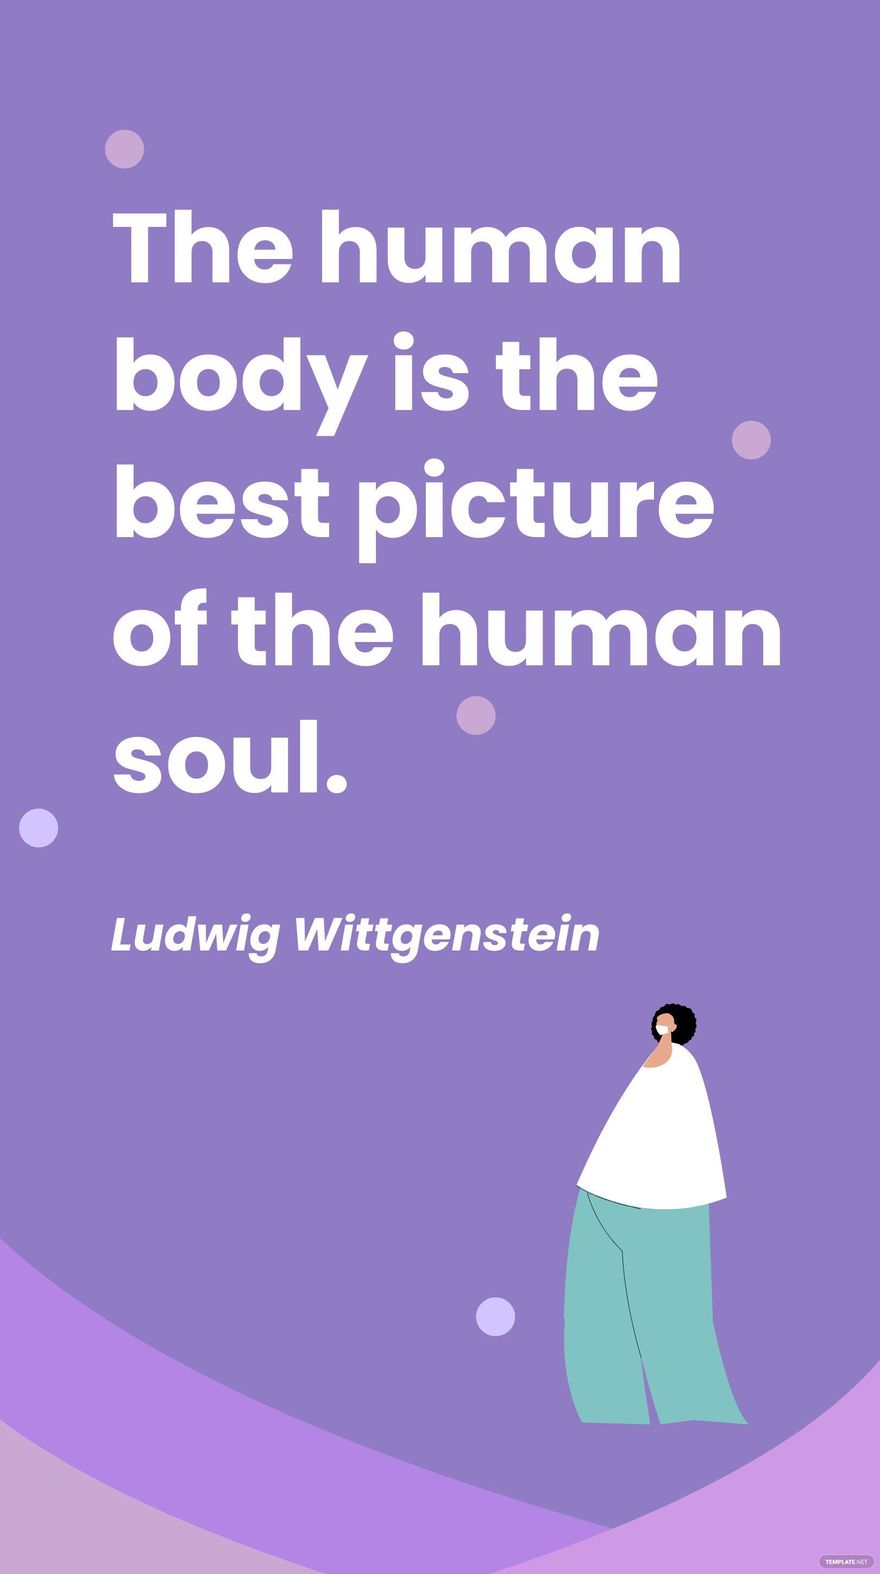 Ludwig Wittgenstein - The human body is the best picture of the human soul.